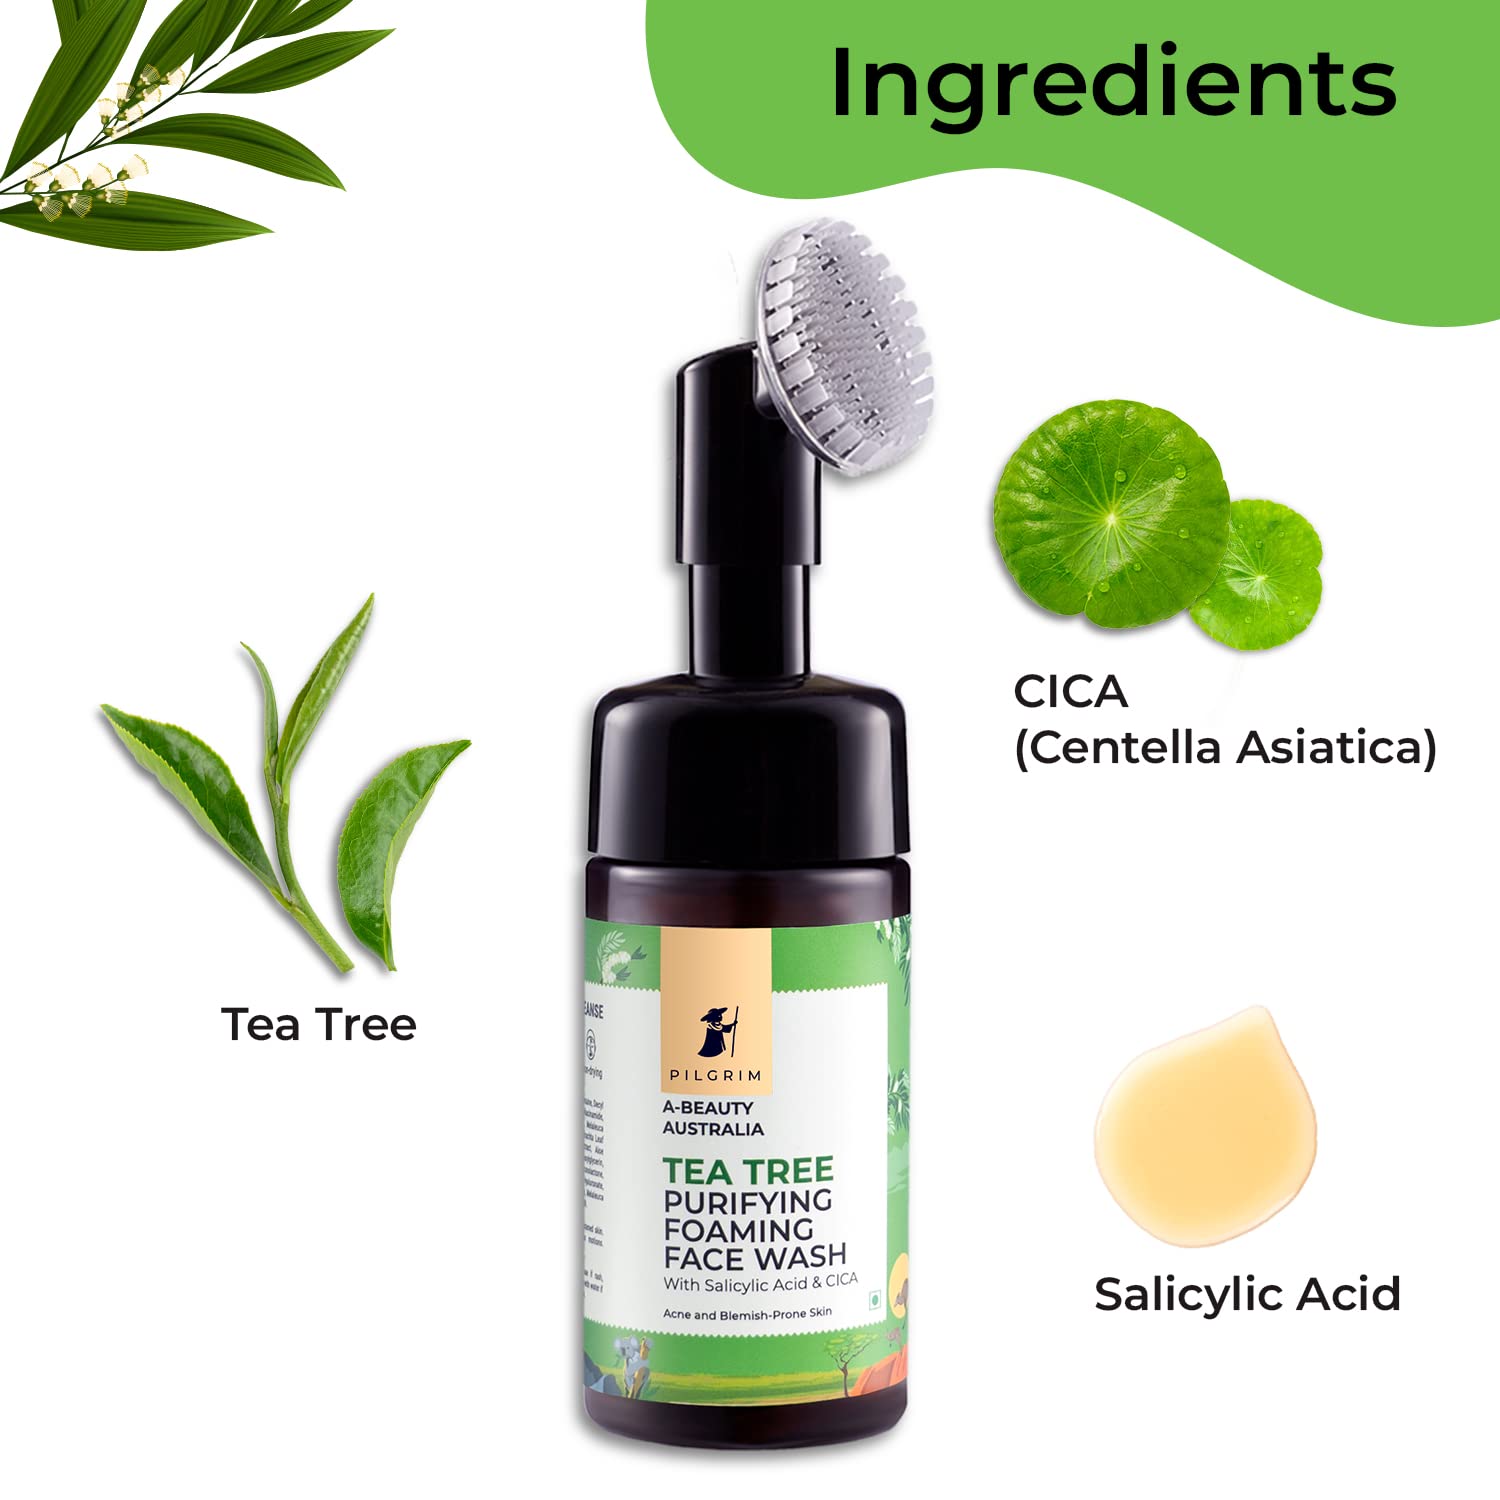 PILGRIM Australian Tea Tree & 1%Salicylic acid Foaming Face wash with brush|Tea Tree face wash with 1%salicylic acid & CICA for oily skin,acne and pimples|Oily skin cleanser for face|Women & Men|120ml face Wash from Pilgrim